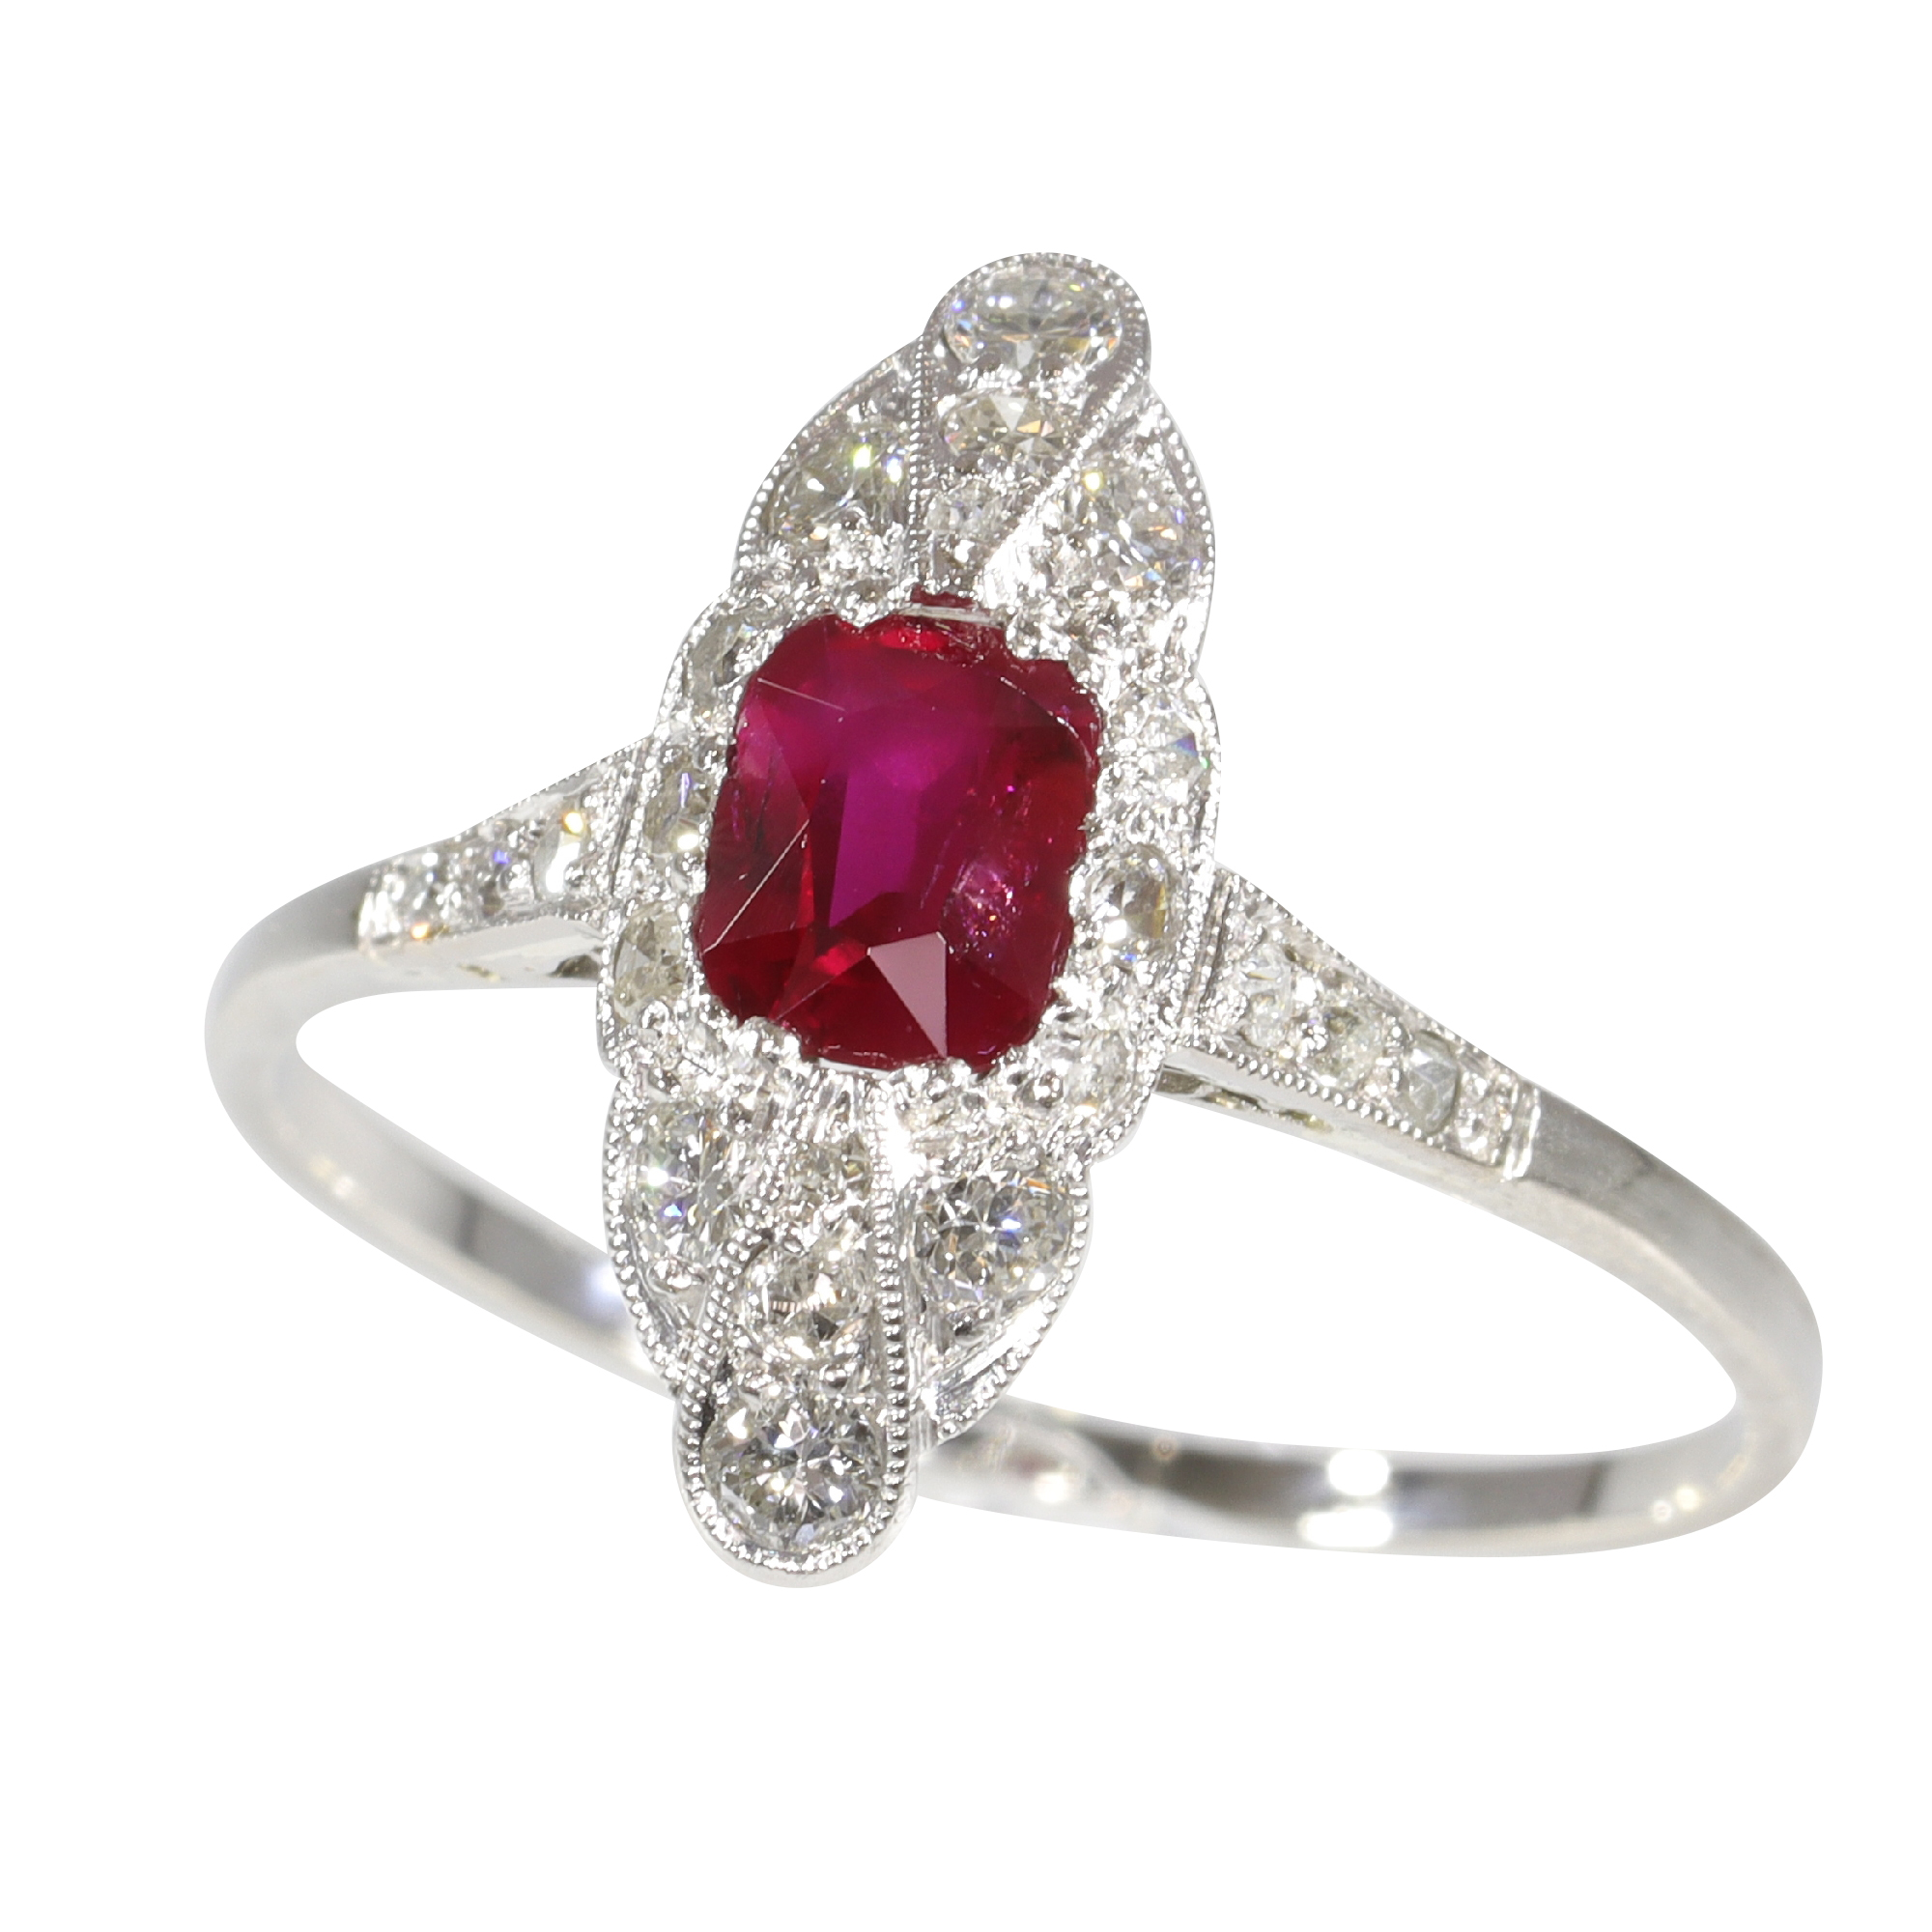 Pigeon Blood Elegance: A Tale of a 1920s Art Deco Ruby